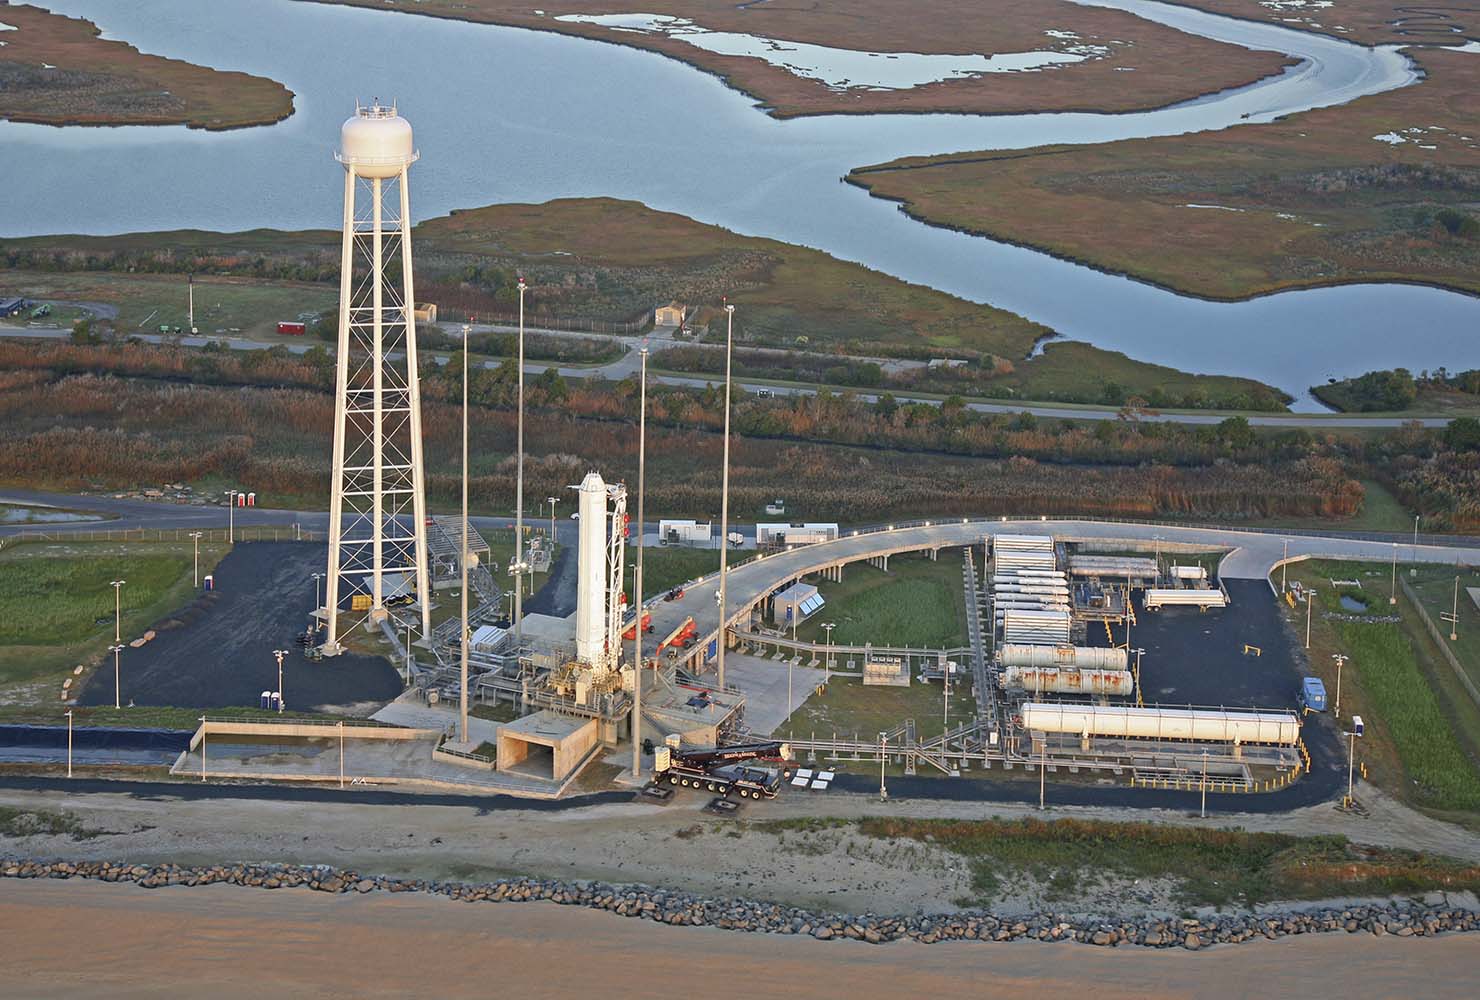 Aerial shot of Wallops Island Pad 0A in Wallops, Virginia. showing rocket on launch page and a large water tower